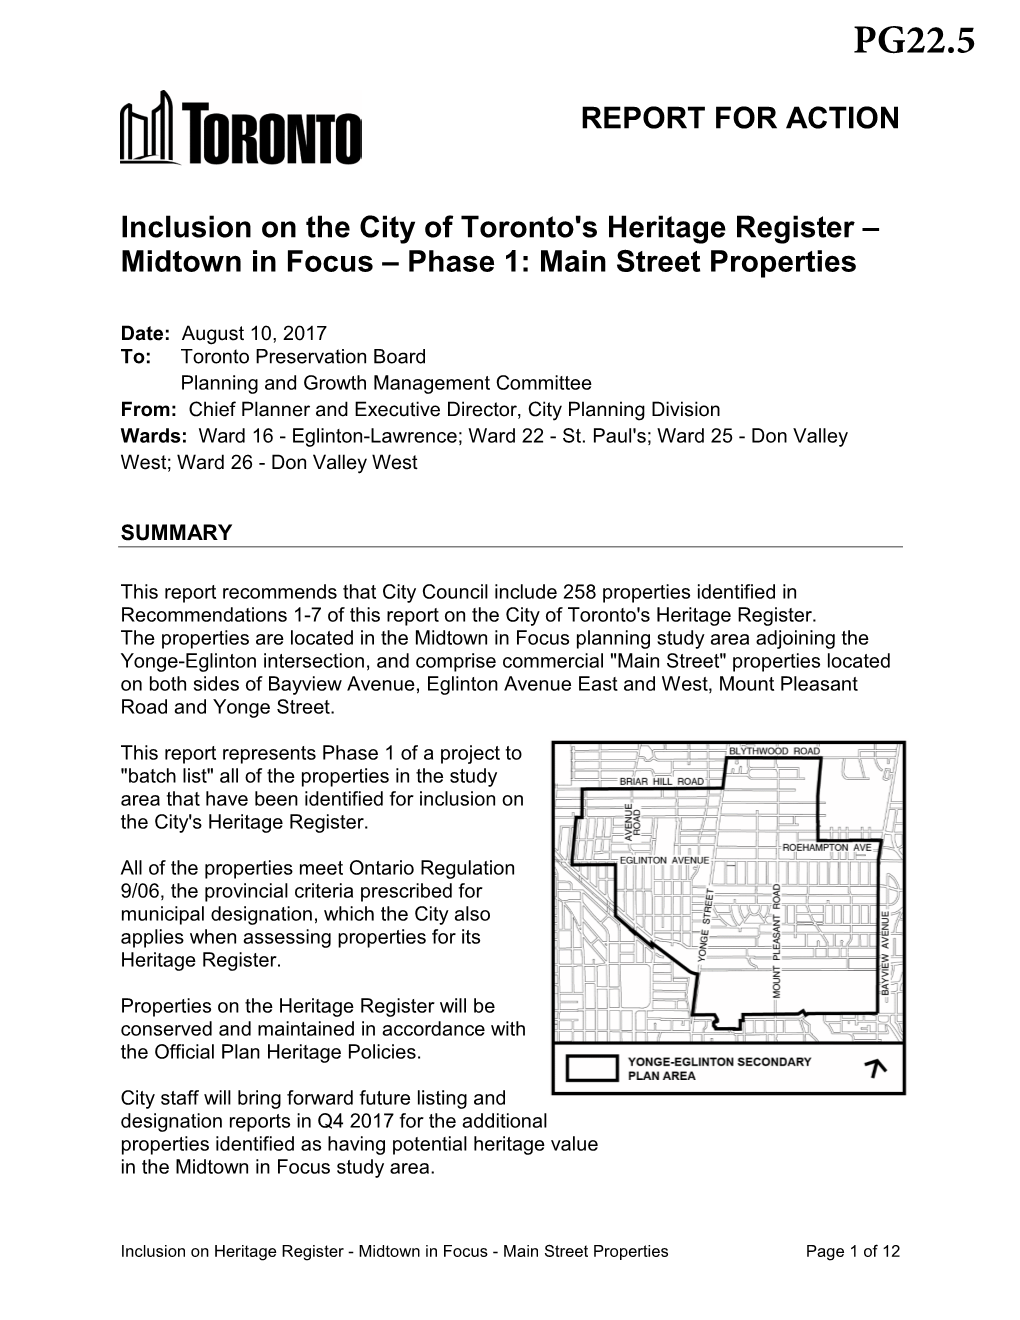 Inclusion on the City of Toronto's Heritage Register – Midtown in Focus – Phase 1: Main Street Properties